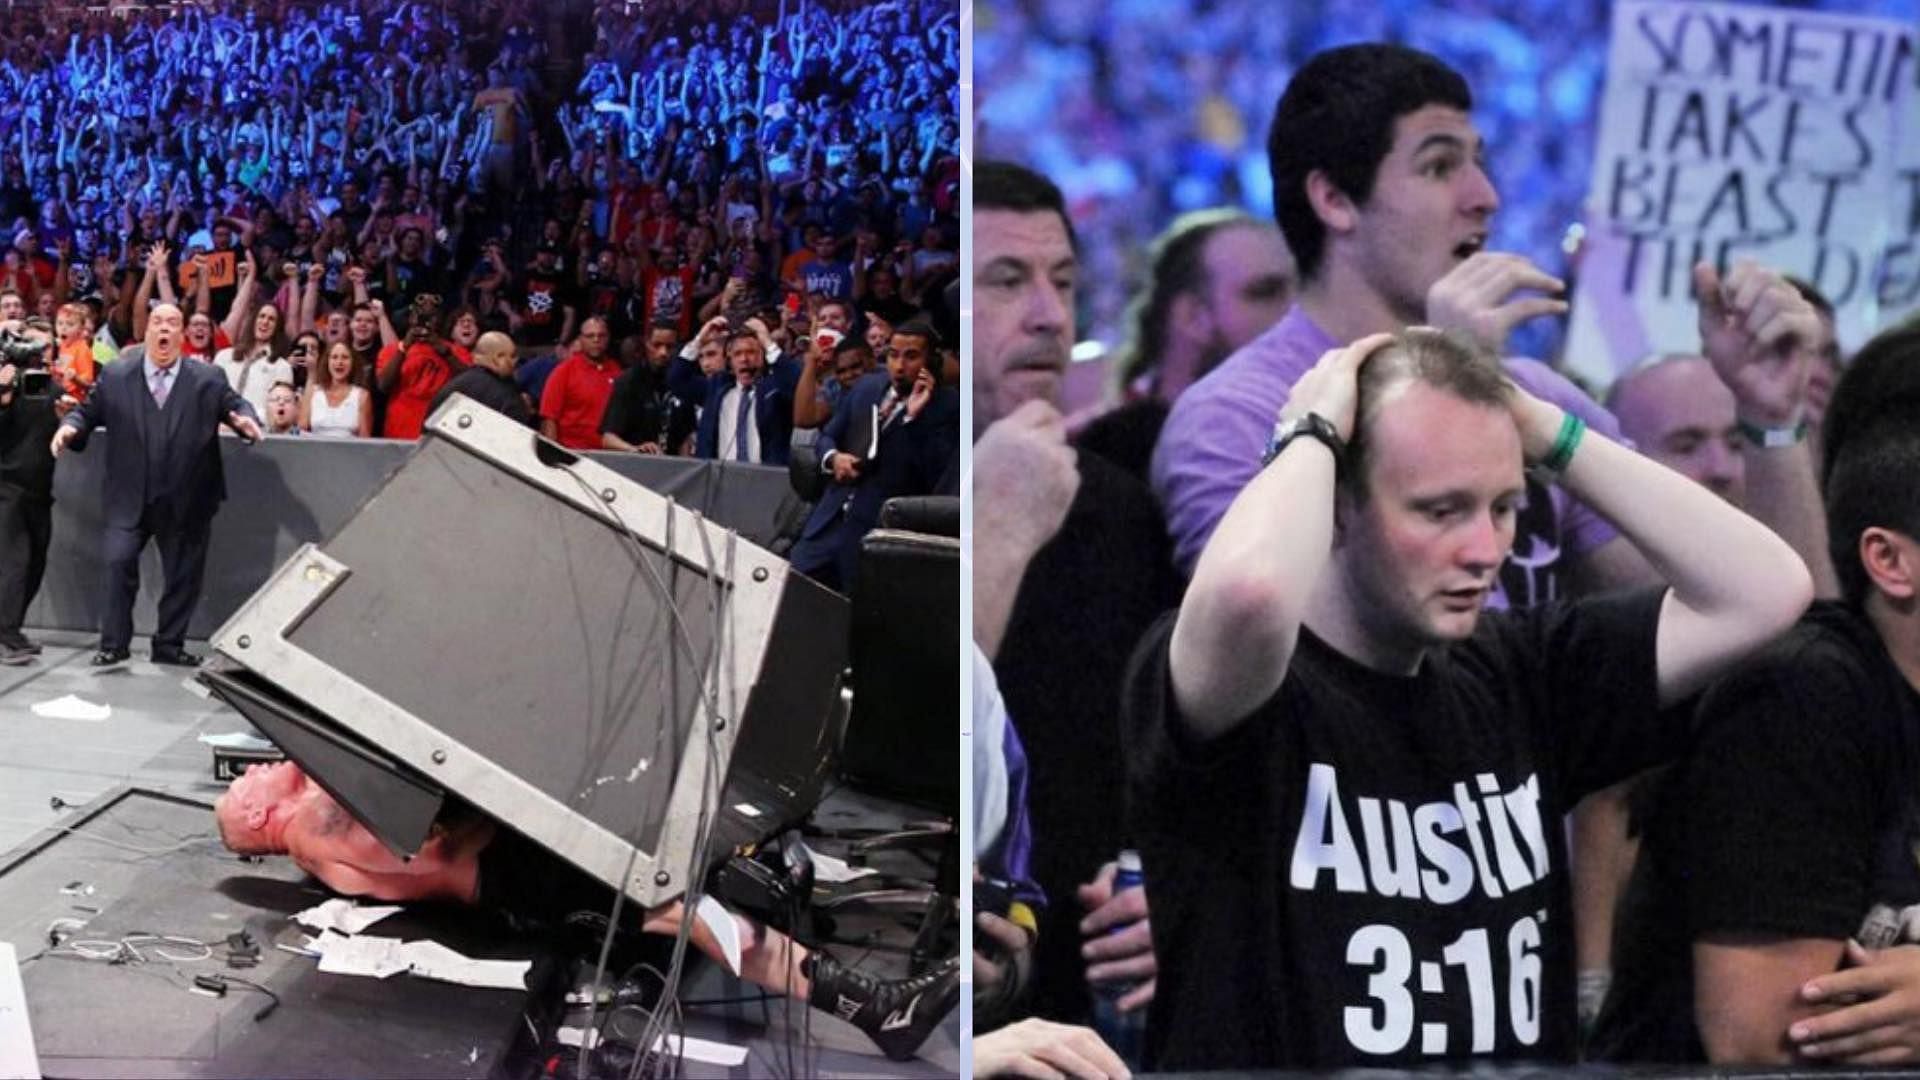 Popular faction was recently attacked at a WWE show